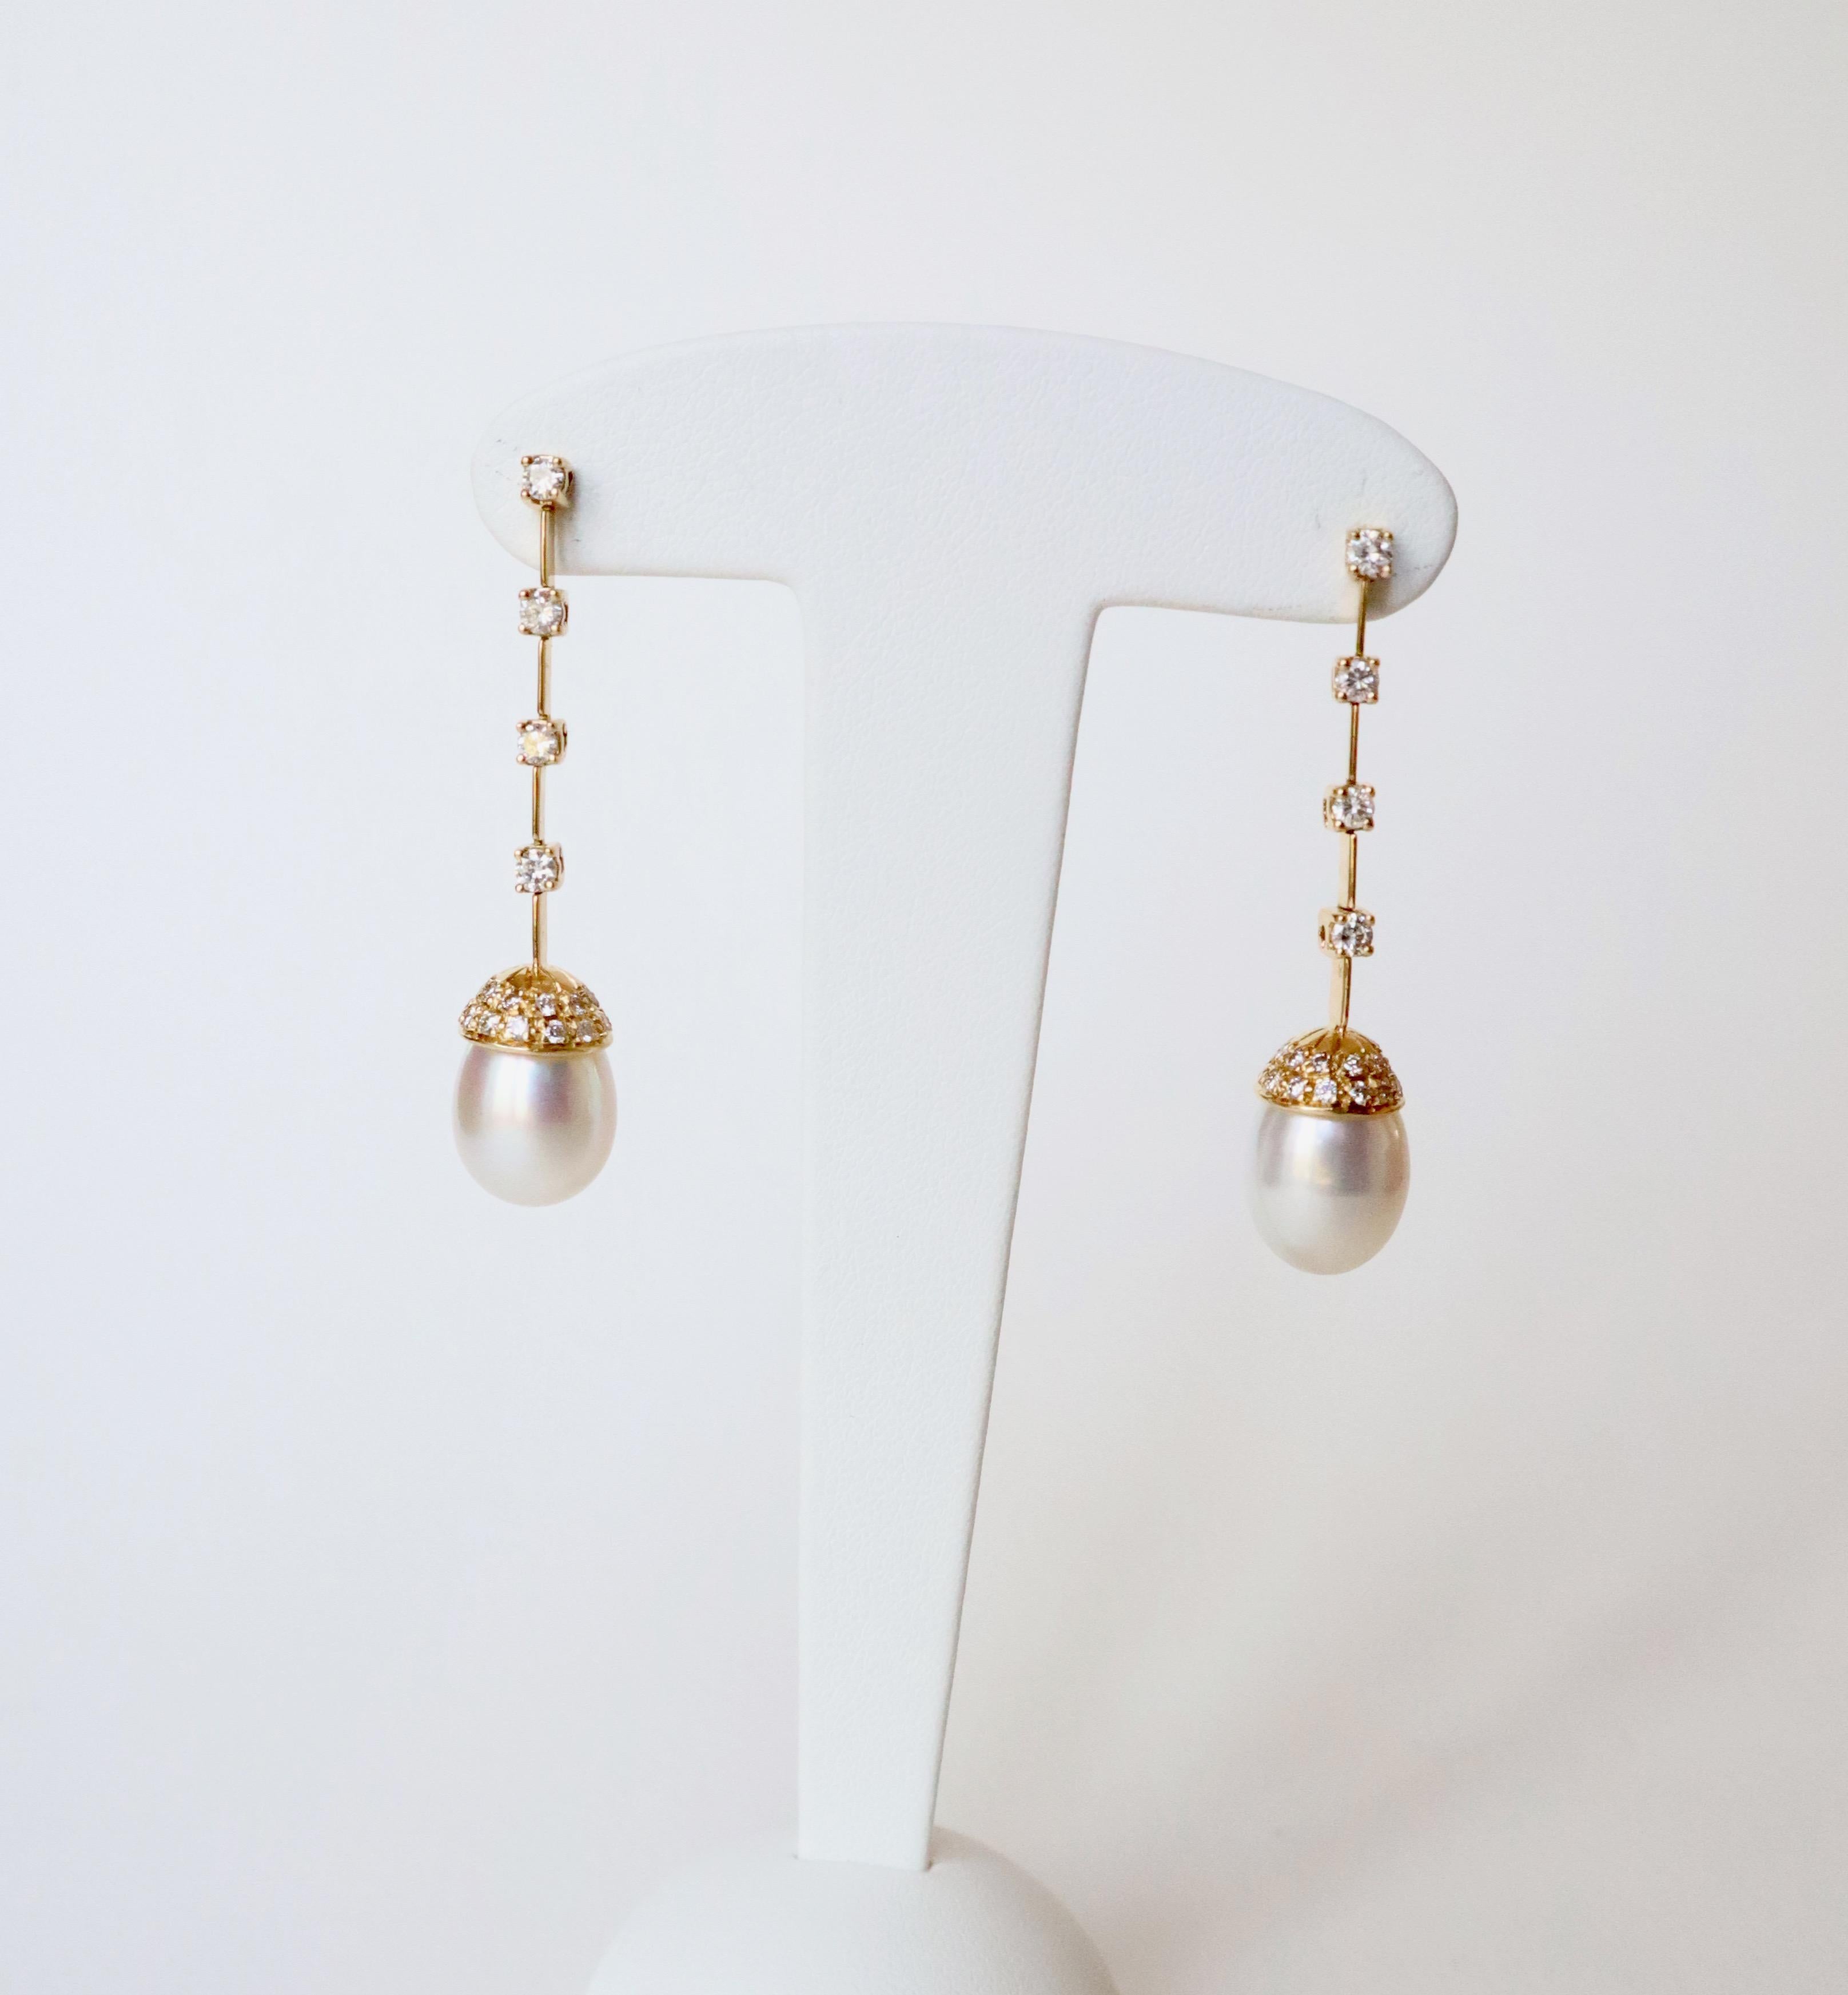 Pair of earrings in 18kt yellow gold, pearls and diamonds. They are composed of 4 articulated stems in 18kt yellow gold, set at their end with 1 diamond each of approximately 0.05kt, attached to an 18kt yellow gold ferrule paved with 25 diamonds for